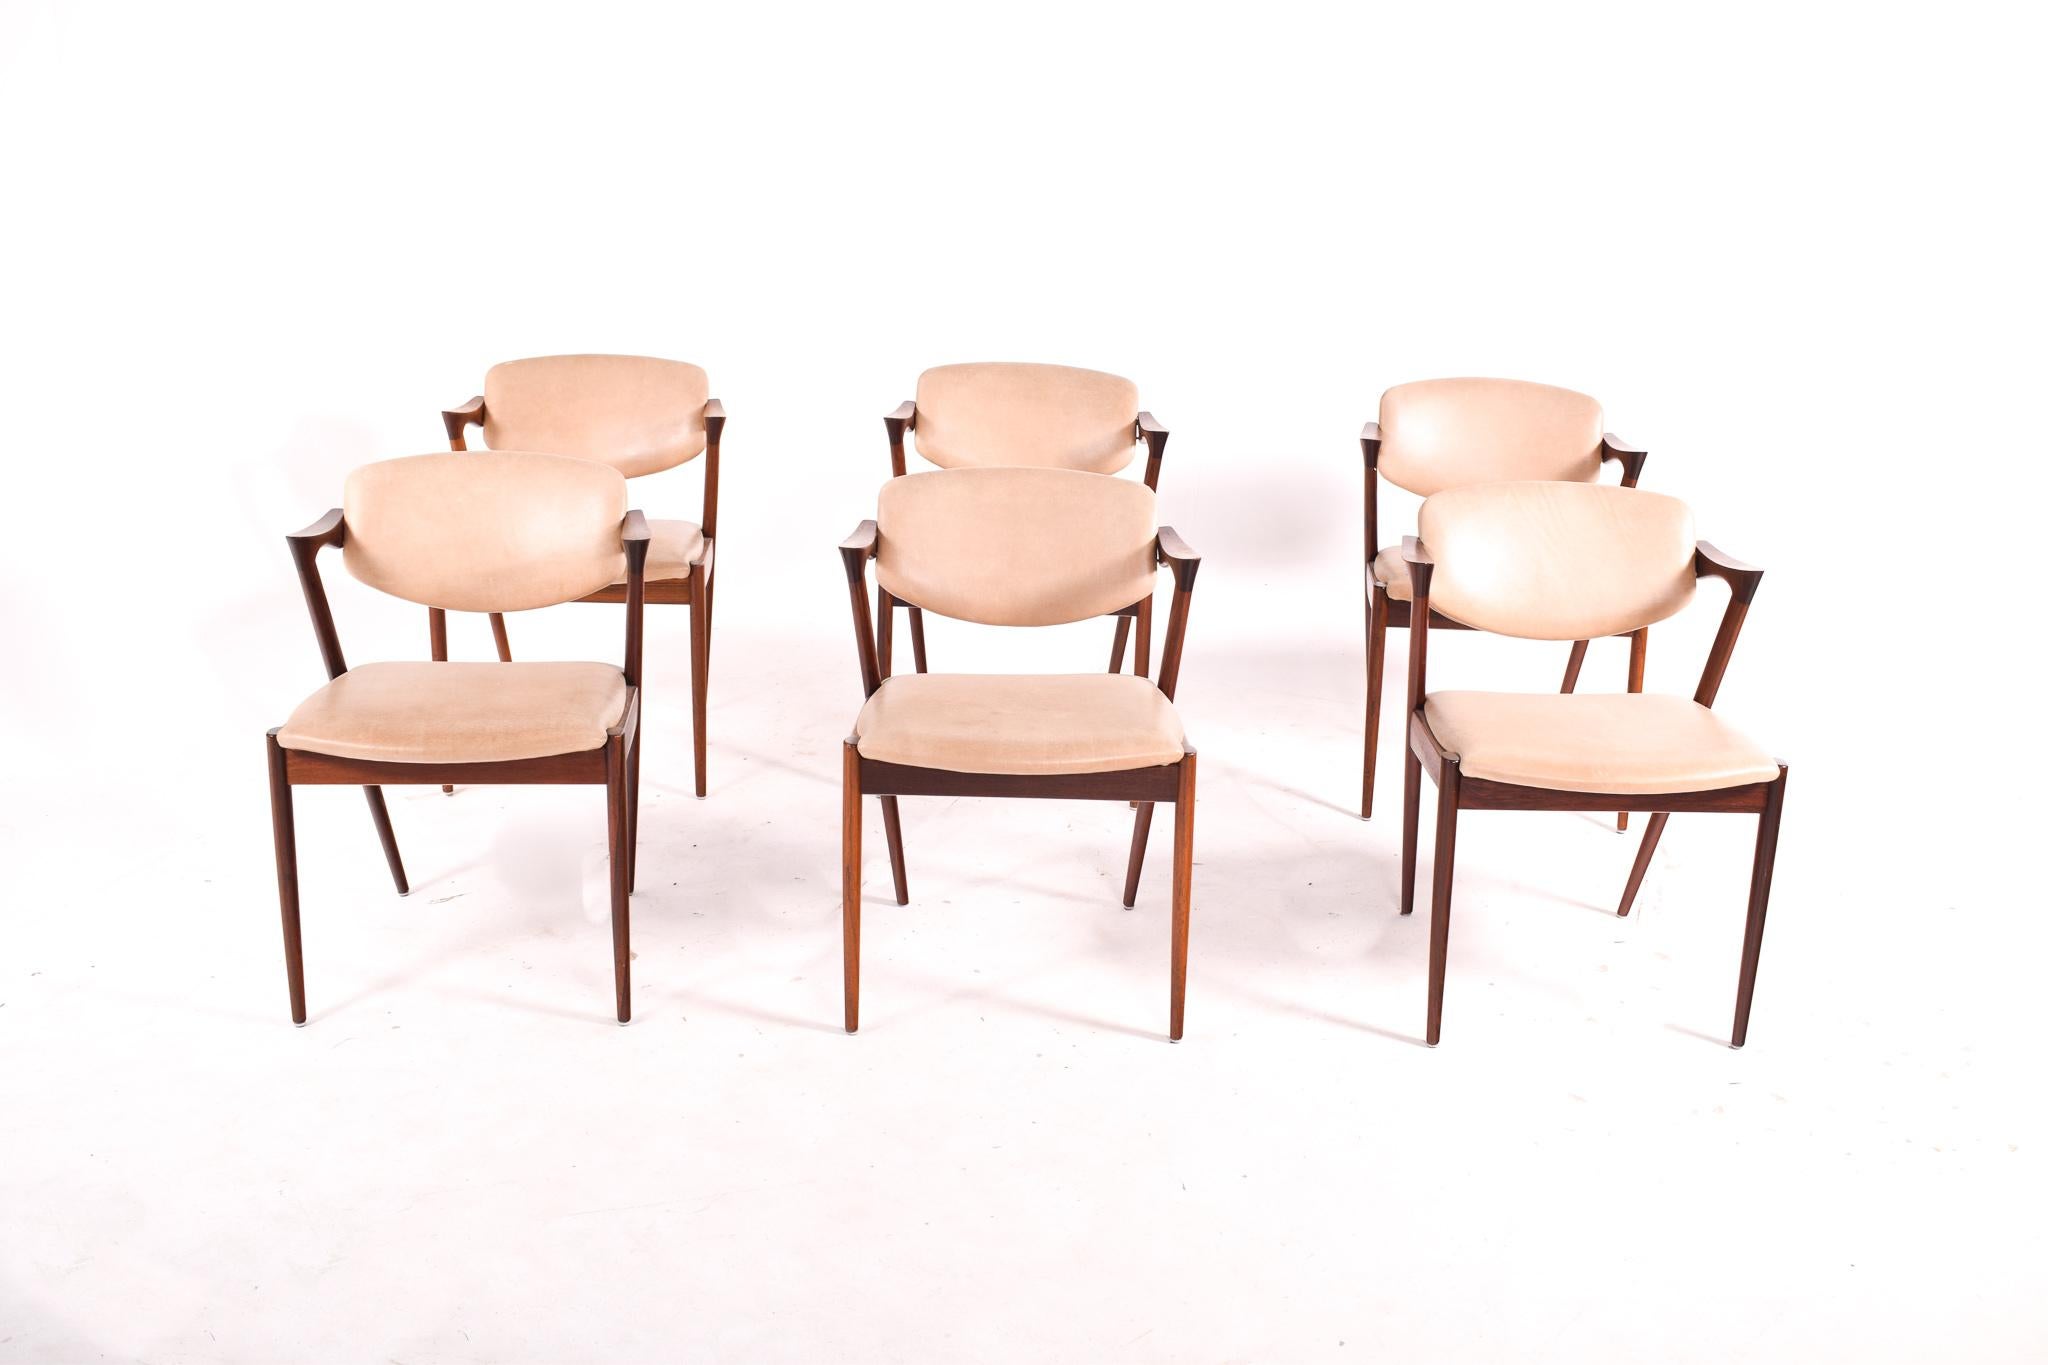 Set of 6 dining chairs model 42 in rosewood. Design by Kai Kristiansen in 1963. The tilting backs and carved armrests are designed for comfort as well as beauty. Made by V. Schou Andersen in Denmark.